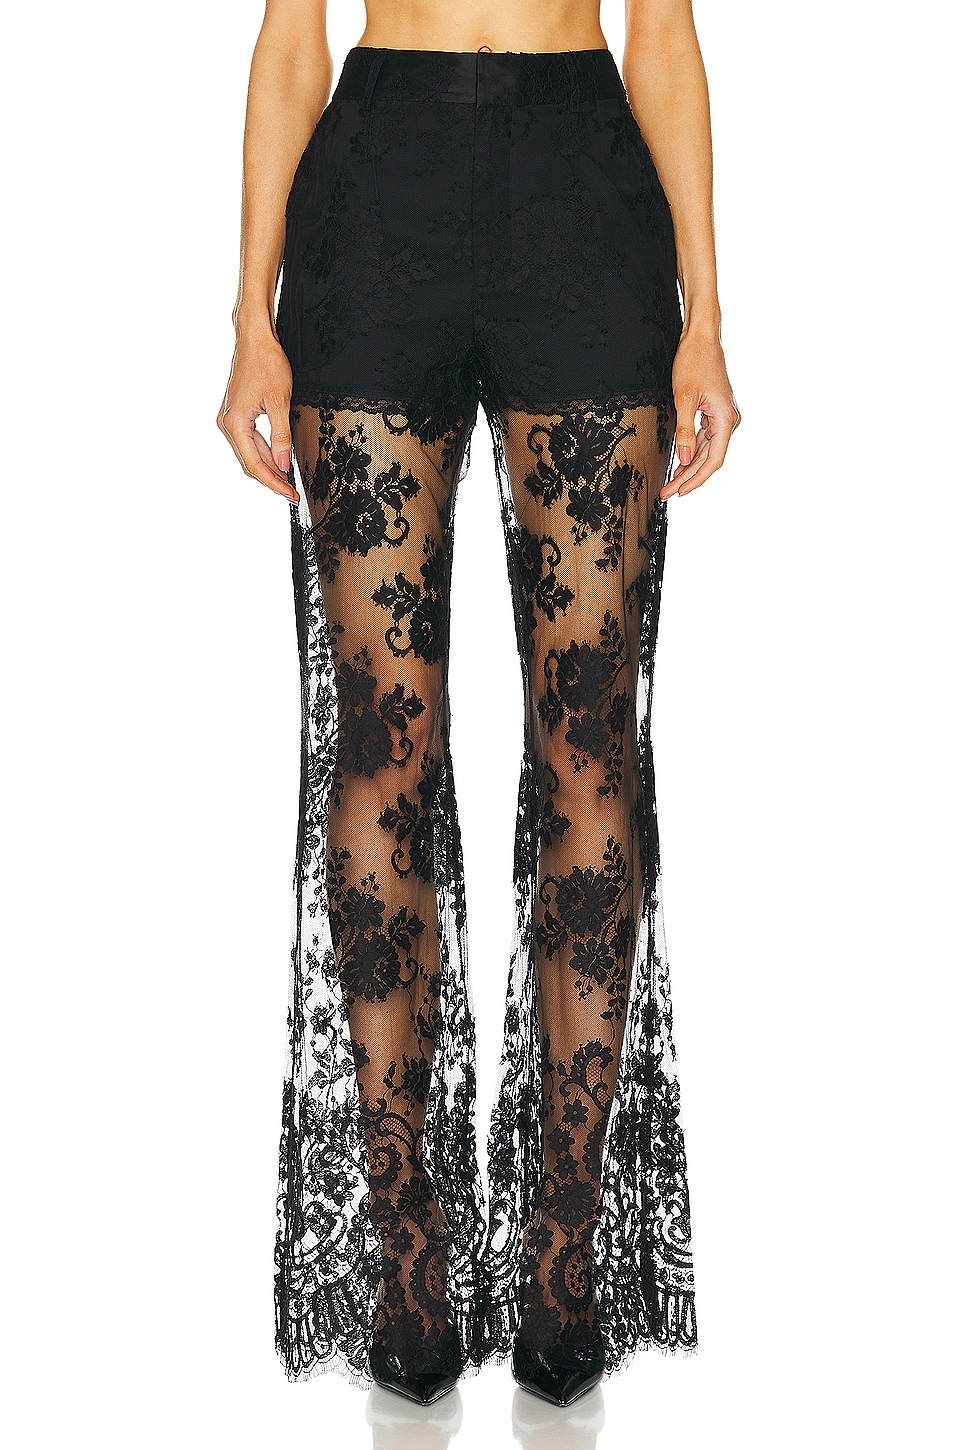 Floral Lace Pant in Black